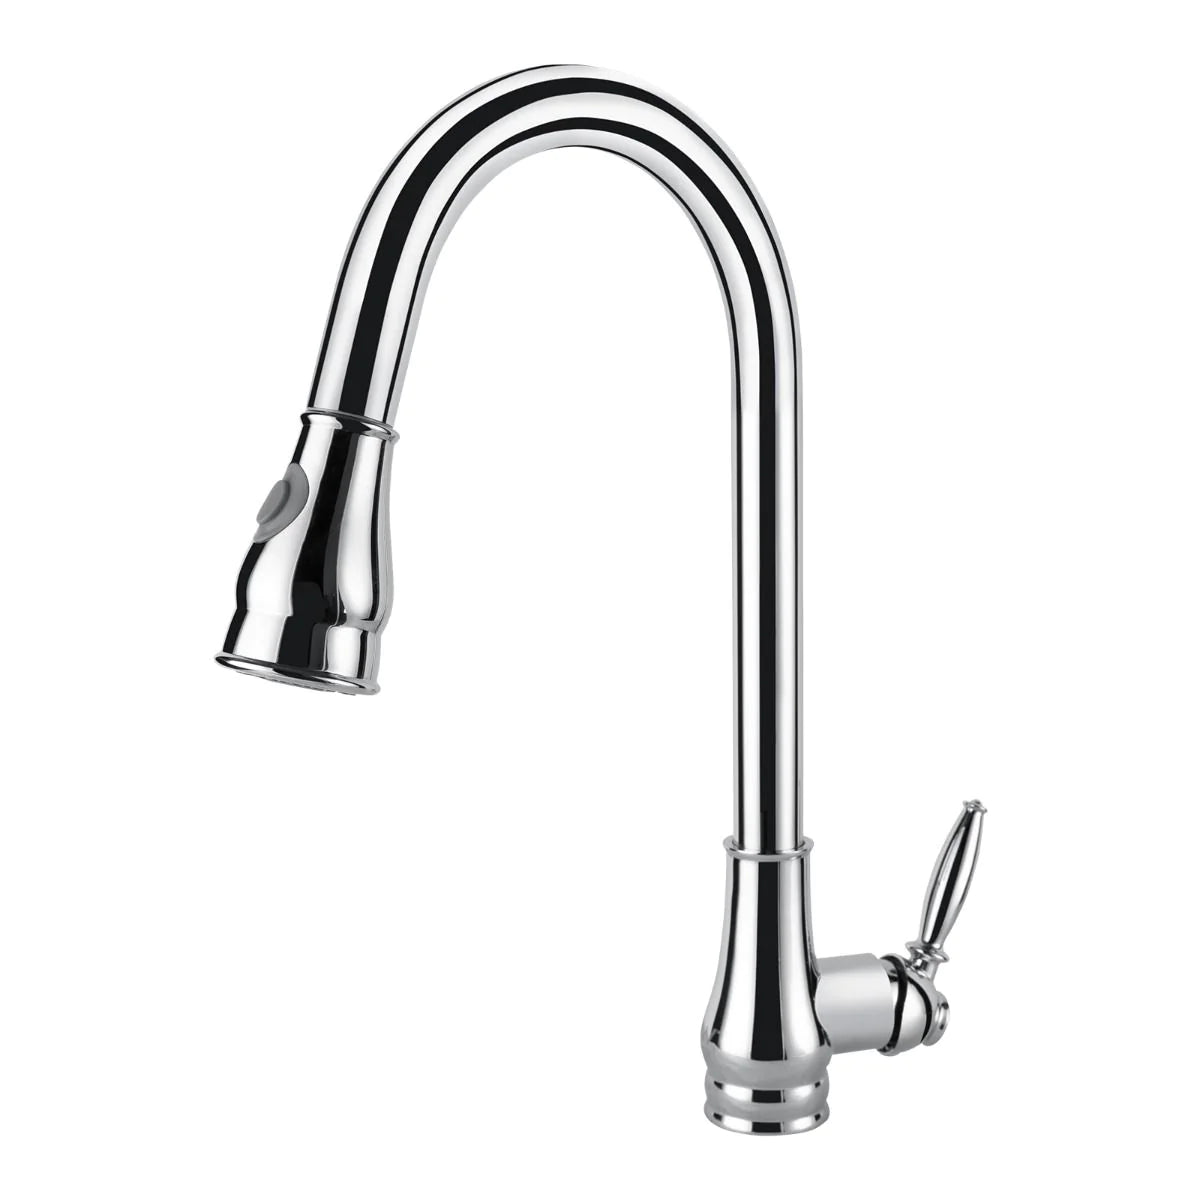 Round Vintage Pull Out Kitchen Sink Mixer Tap: Classic design with modern functionality-CH1018.KM